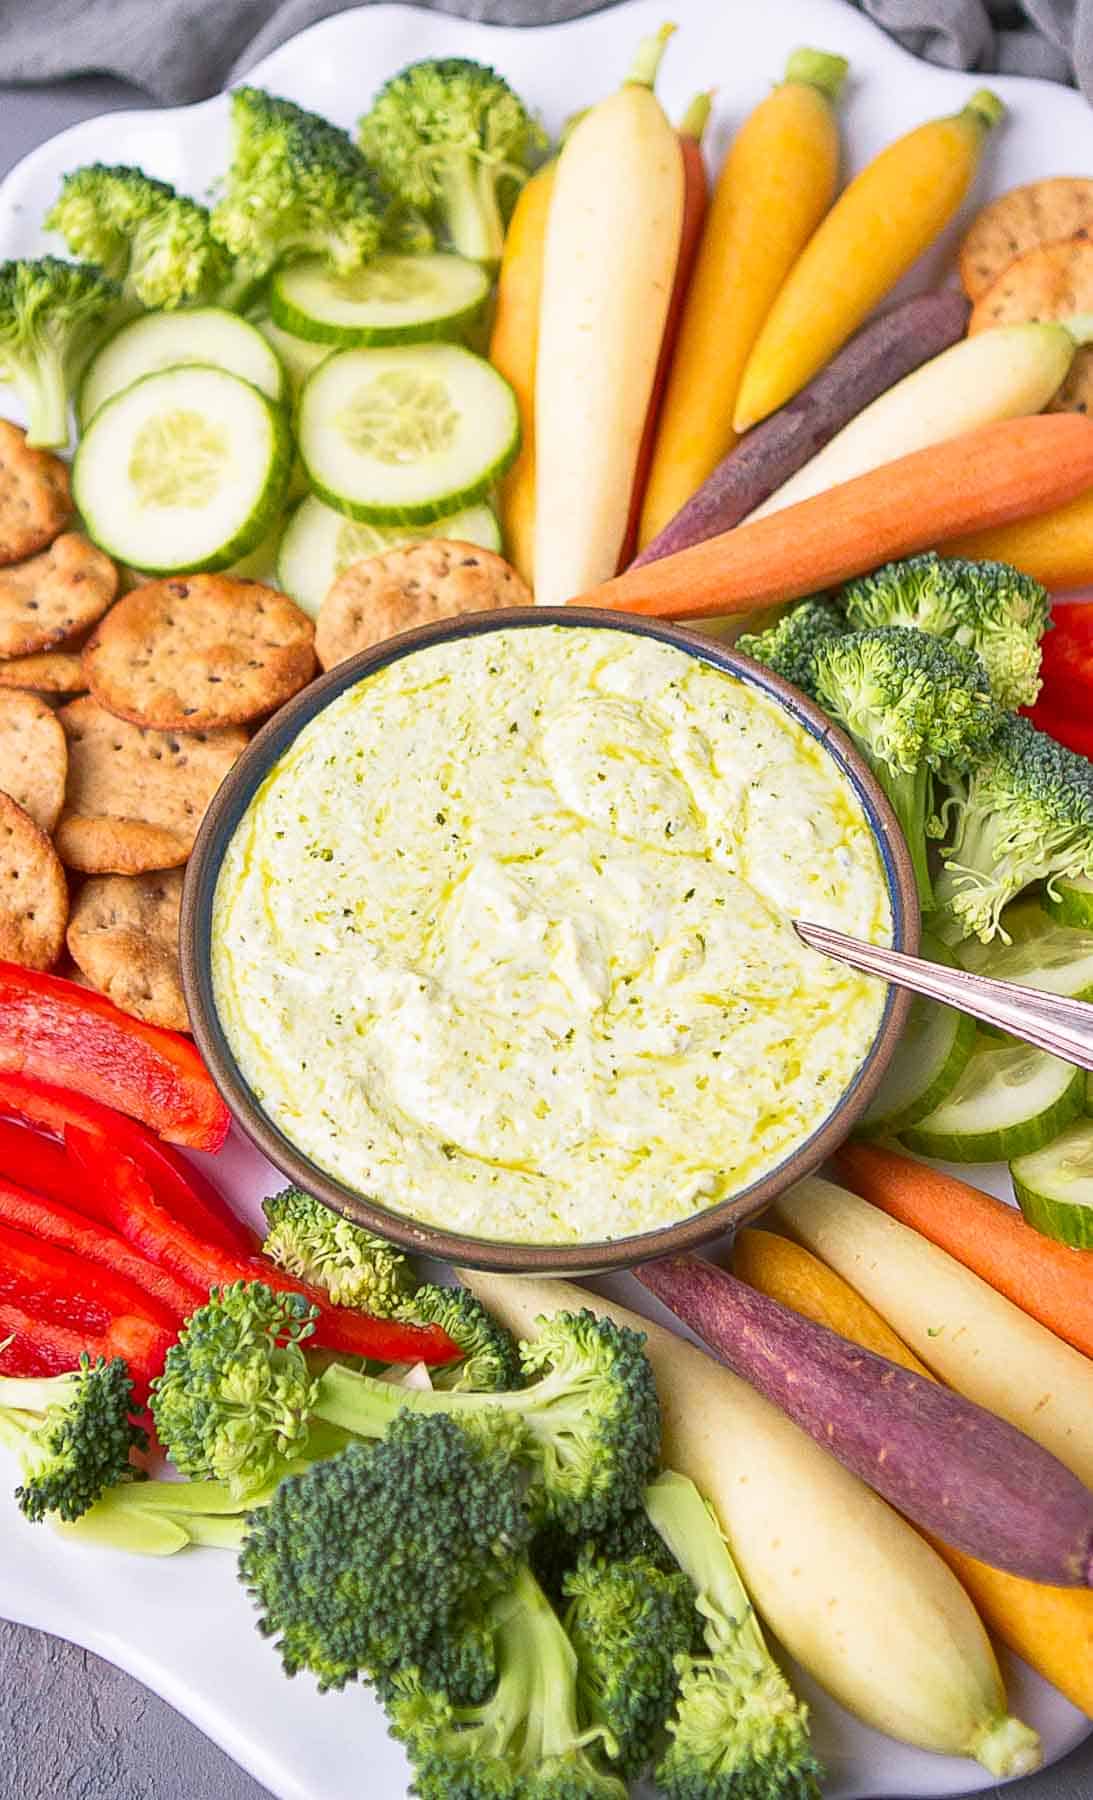 Yogurt dip with pesto in a bowl, with vegetables on a platter.